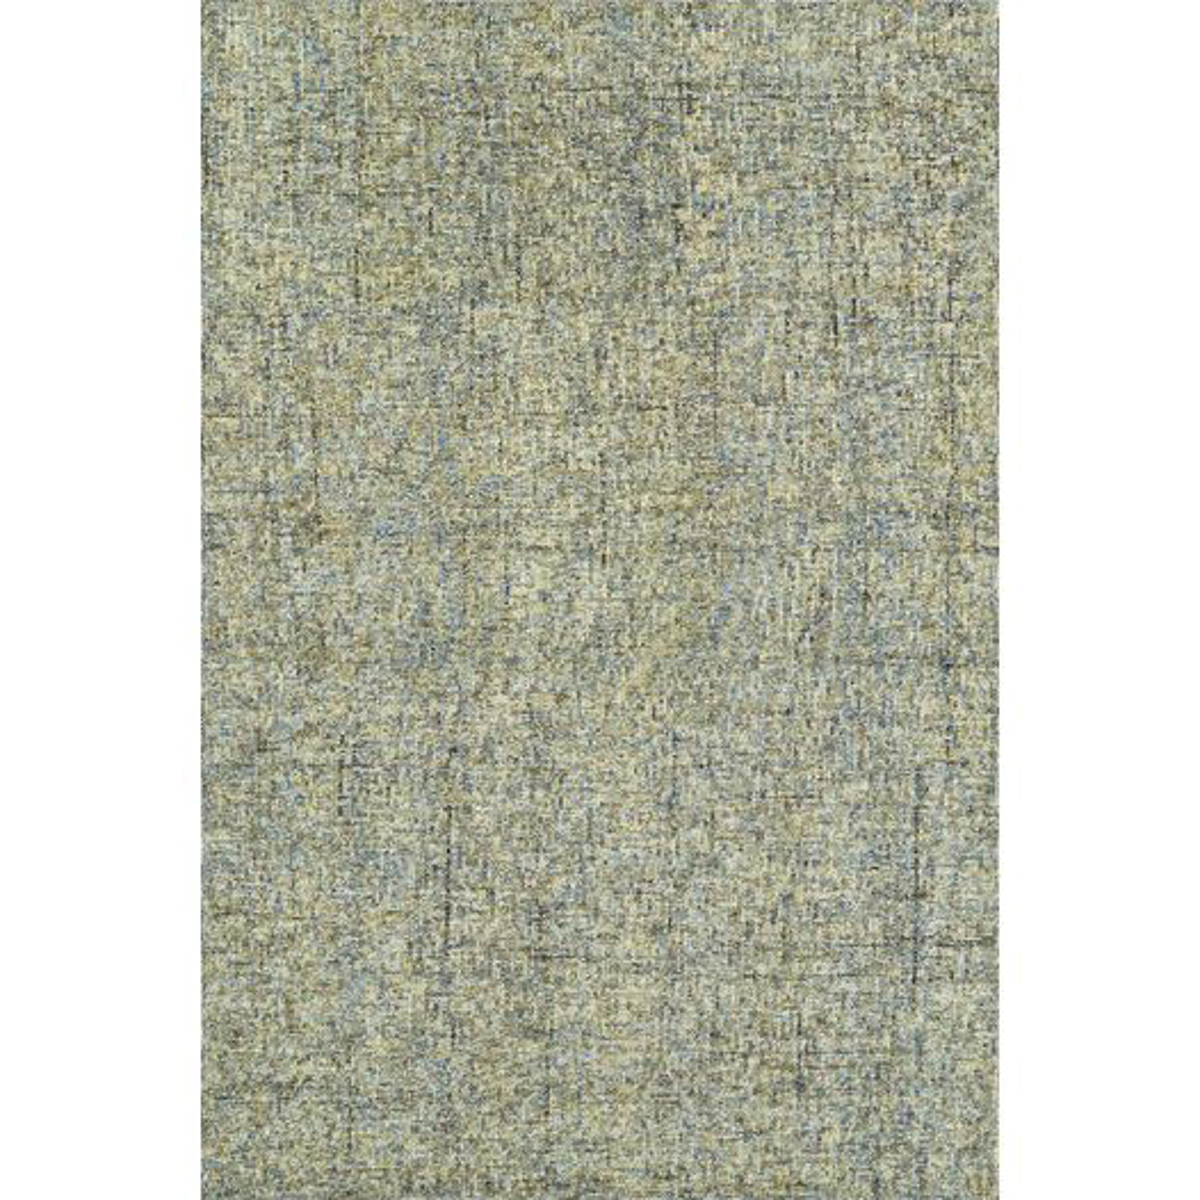 Picture of Calisa 5 Chambray 8X10 Area Rug